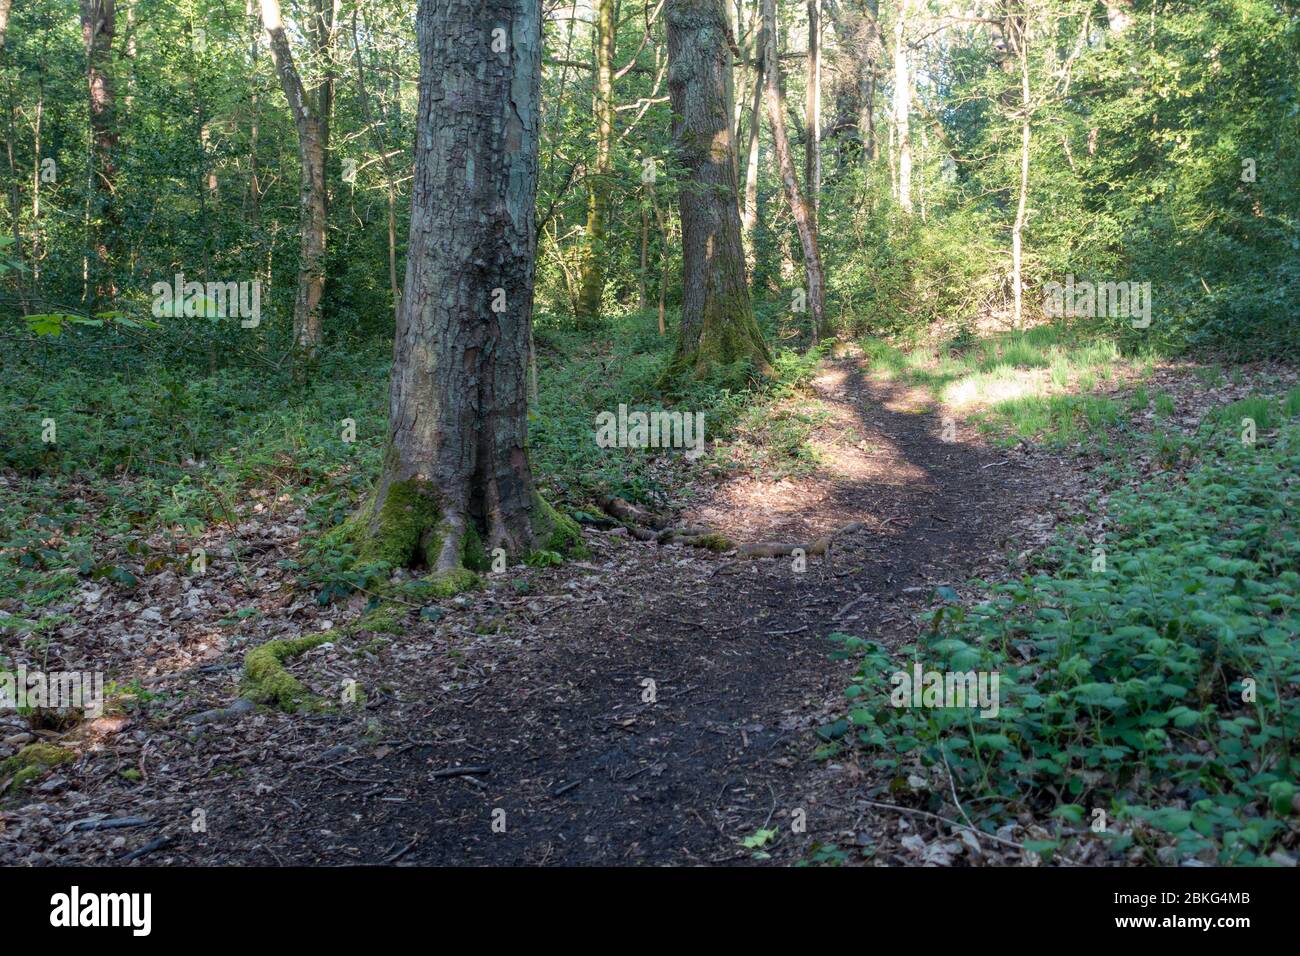 Ecclesall Woods are ancient woodland in Sheffield UK. A small path through the trees Stock Photo